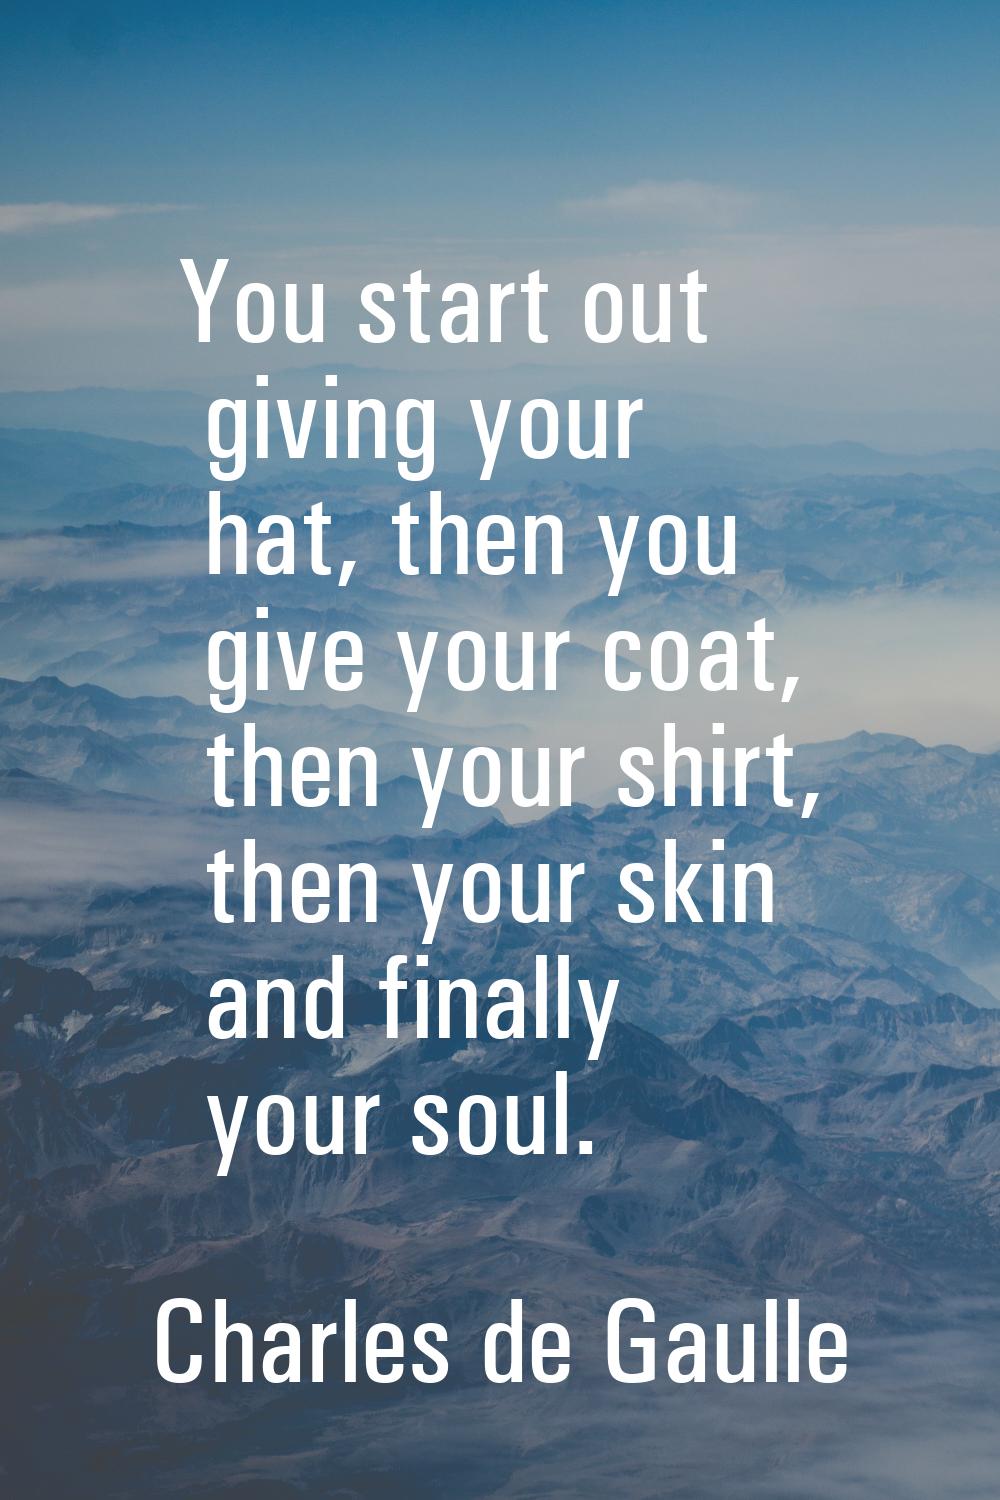 You start out giving your hat, then you give your coat, then your shirt, then your skin and finally